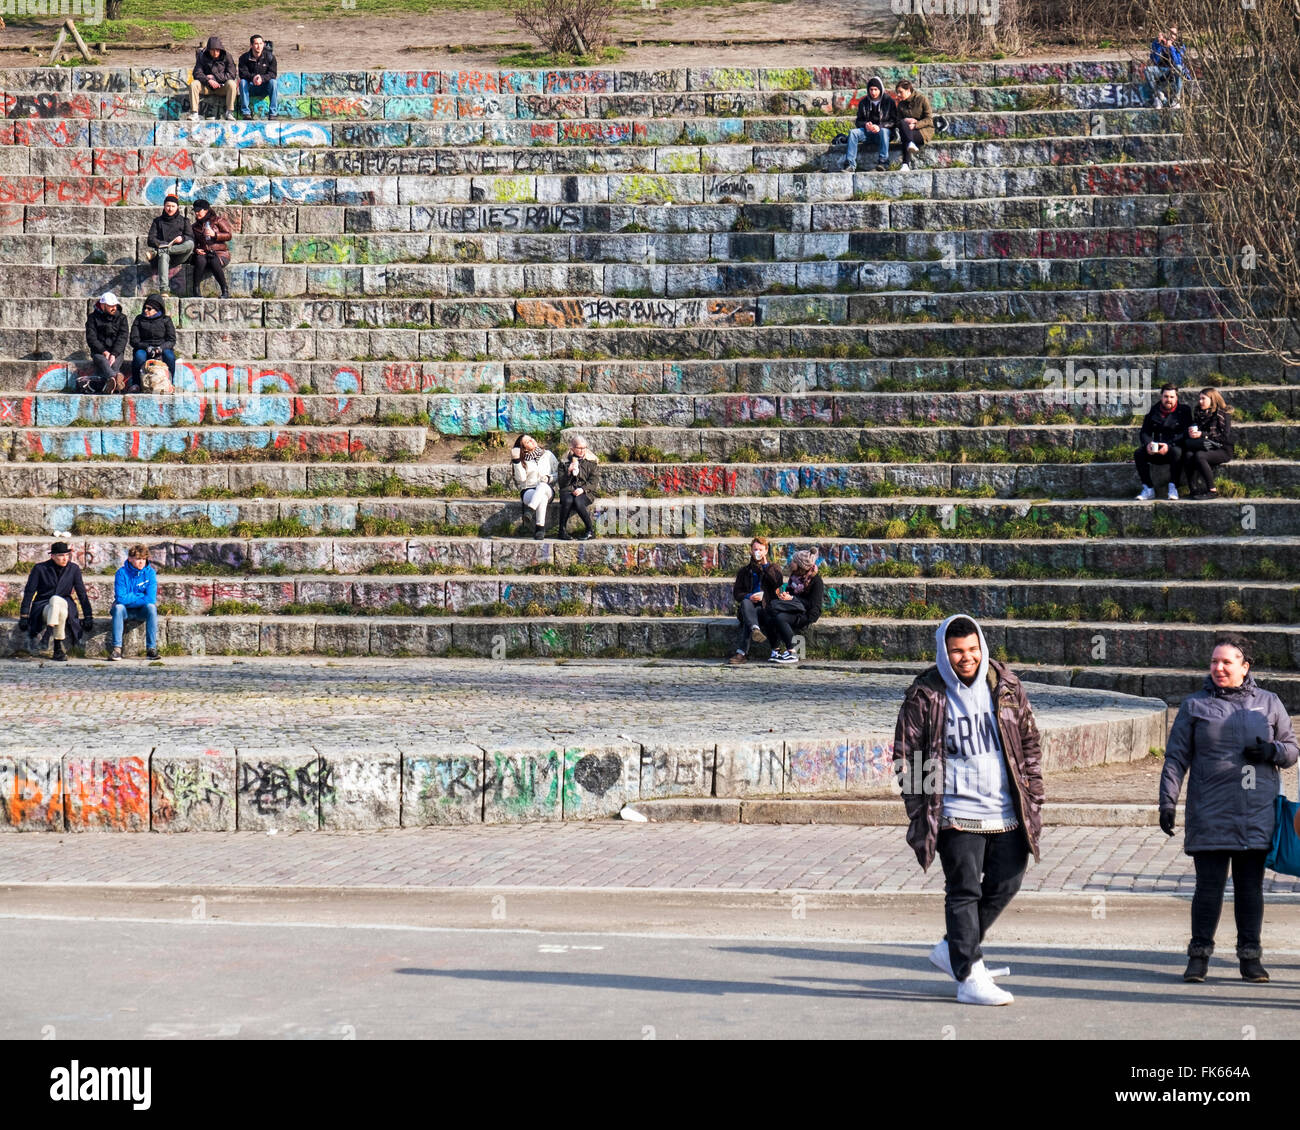 Mauerpark, Berlin - people at outdoor amphitheatre wait for entertainers and street performers Stock Photo